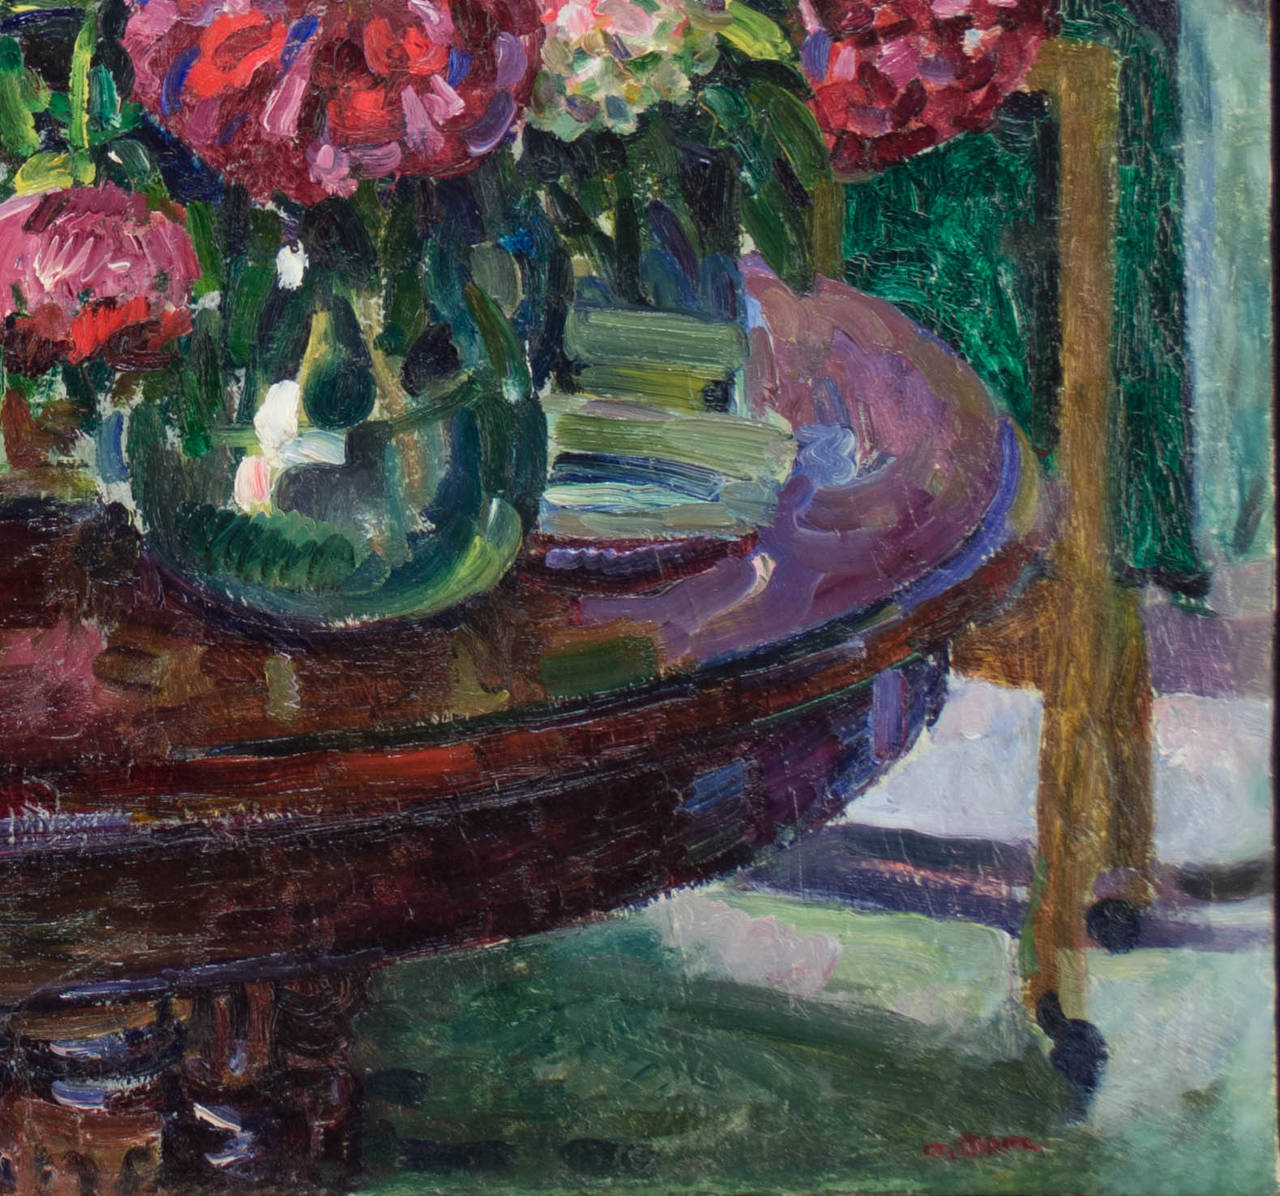 A colorful, Impressionist style floral still life from the South of France. Bright pink peonies in a glass bowl with another taller vase on a round wood table. Paint applied in a heavy impasto. Illegible signature, lower right.
Canvas size: 39.5